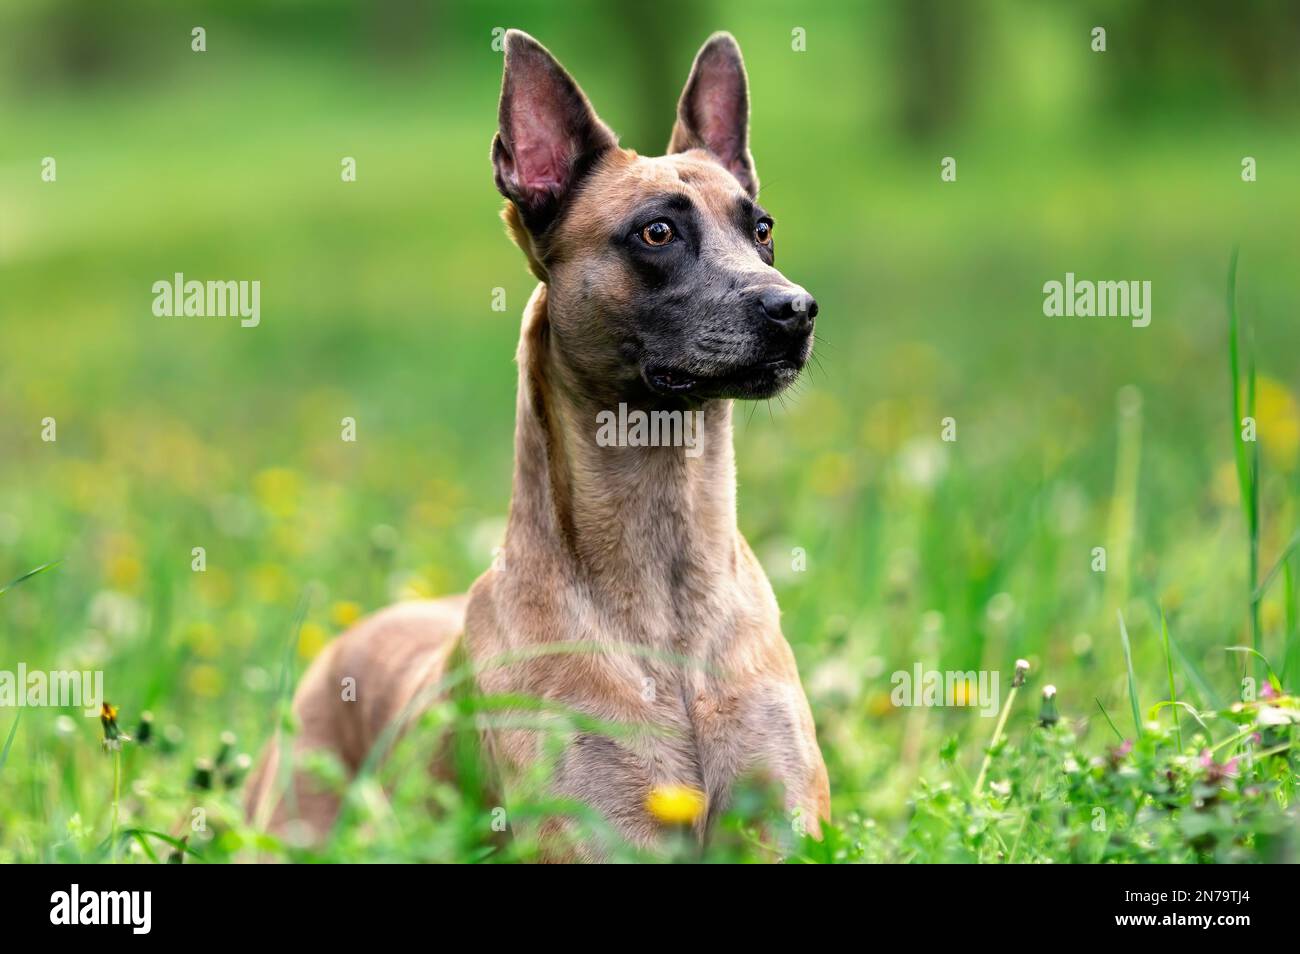 Serious dog of belgian malinois breed standing in the green grass at summer Stock Photo